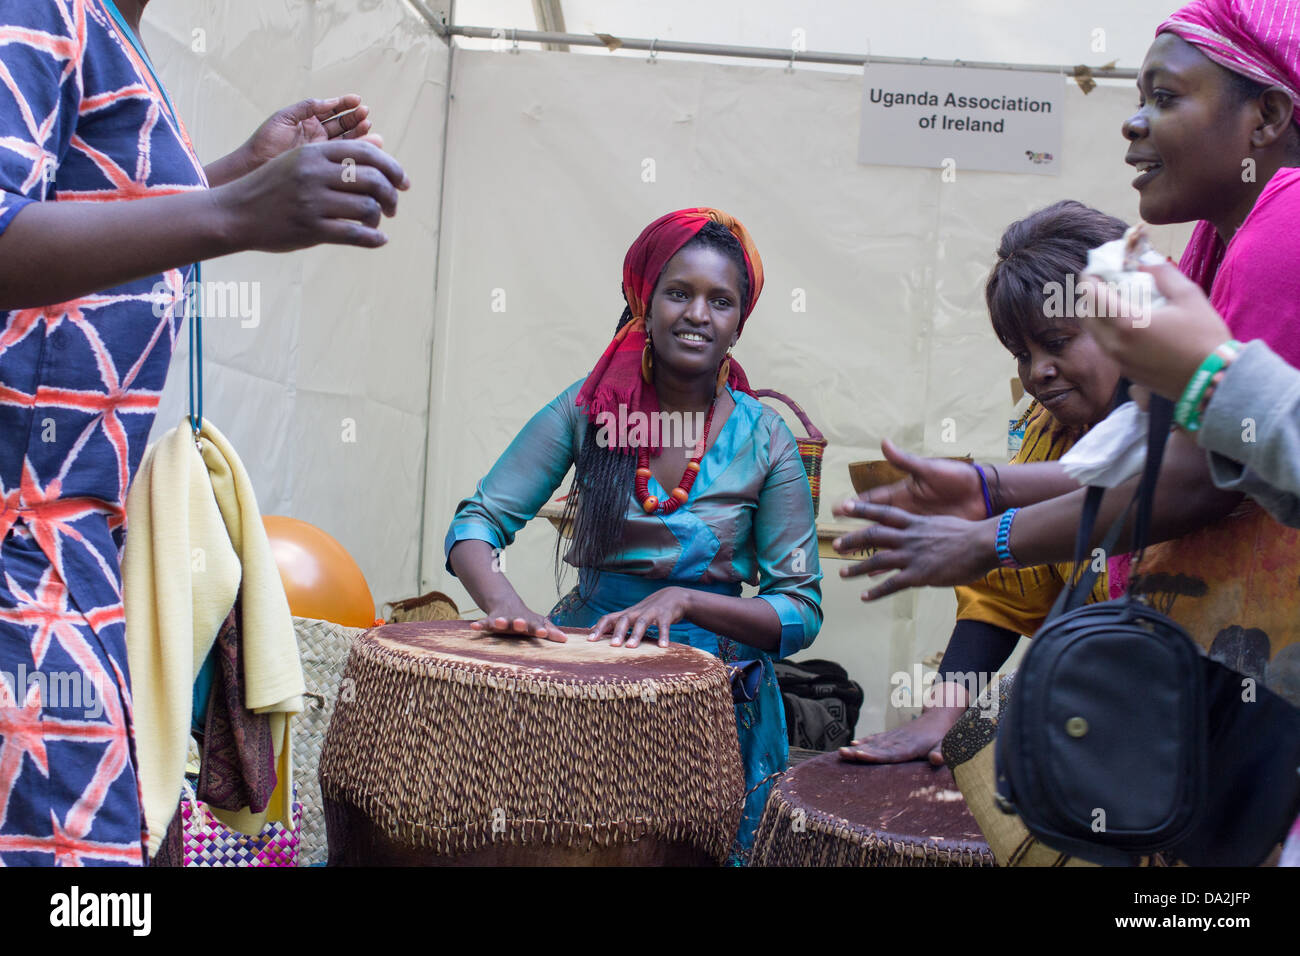 A woman plays on a large drum during festival called Africa Day. Stock Photo